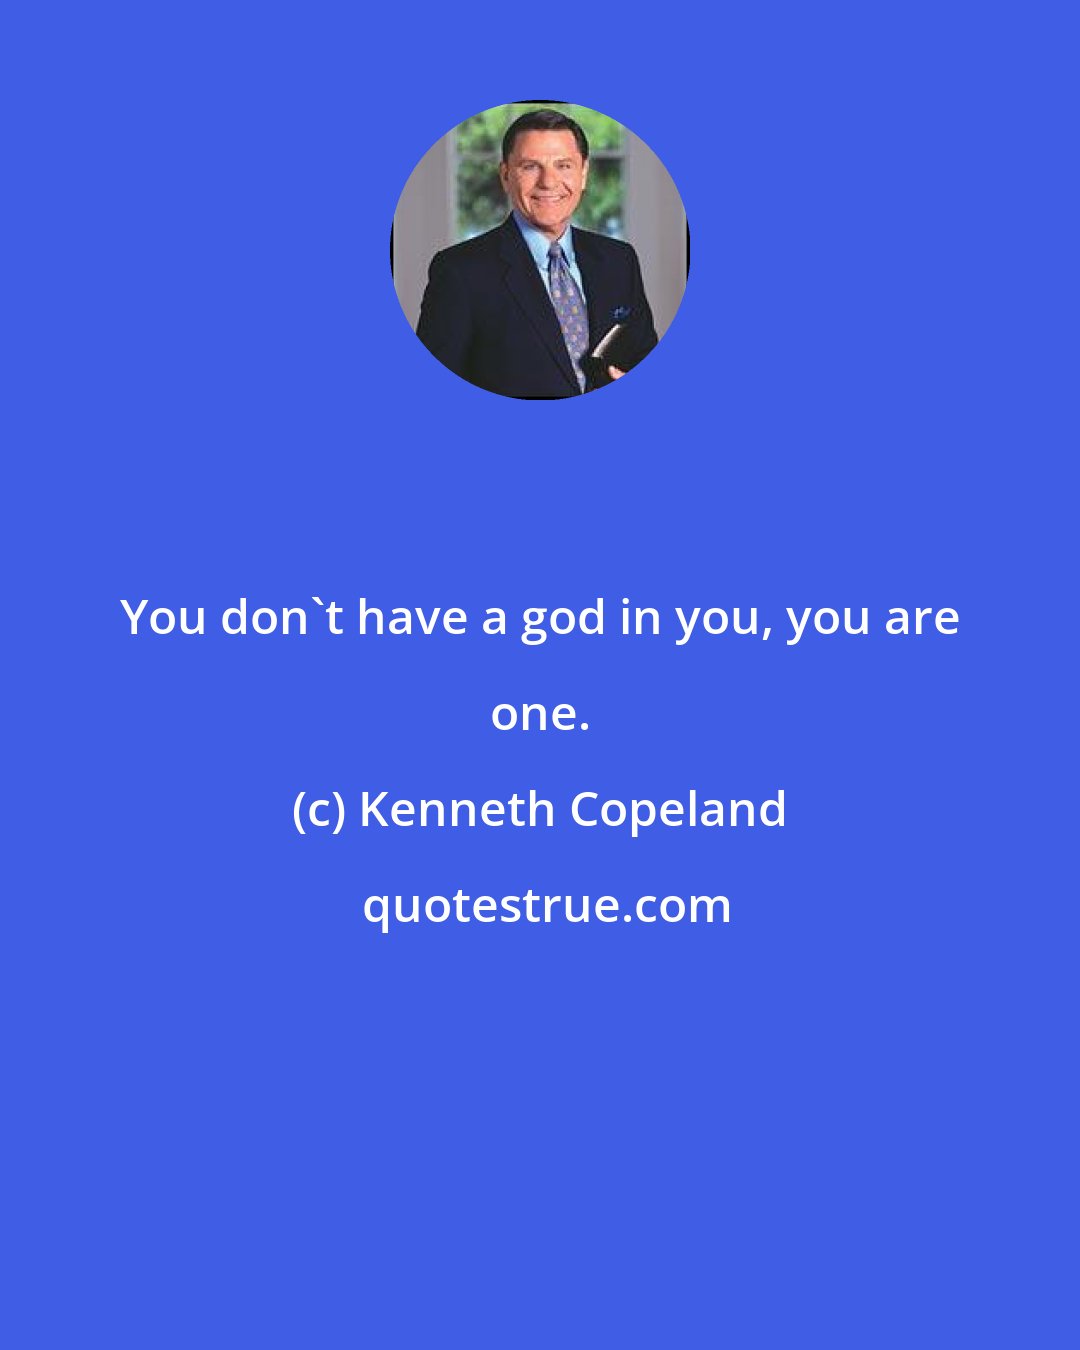 Kenneth Copeland: You don't have a god in you, you are one.